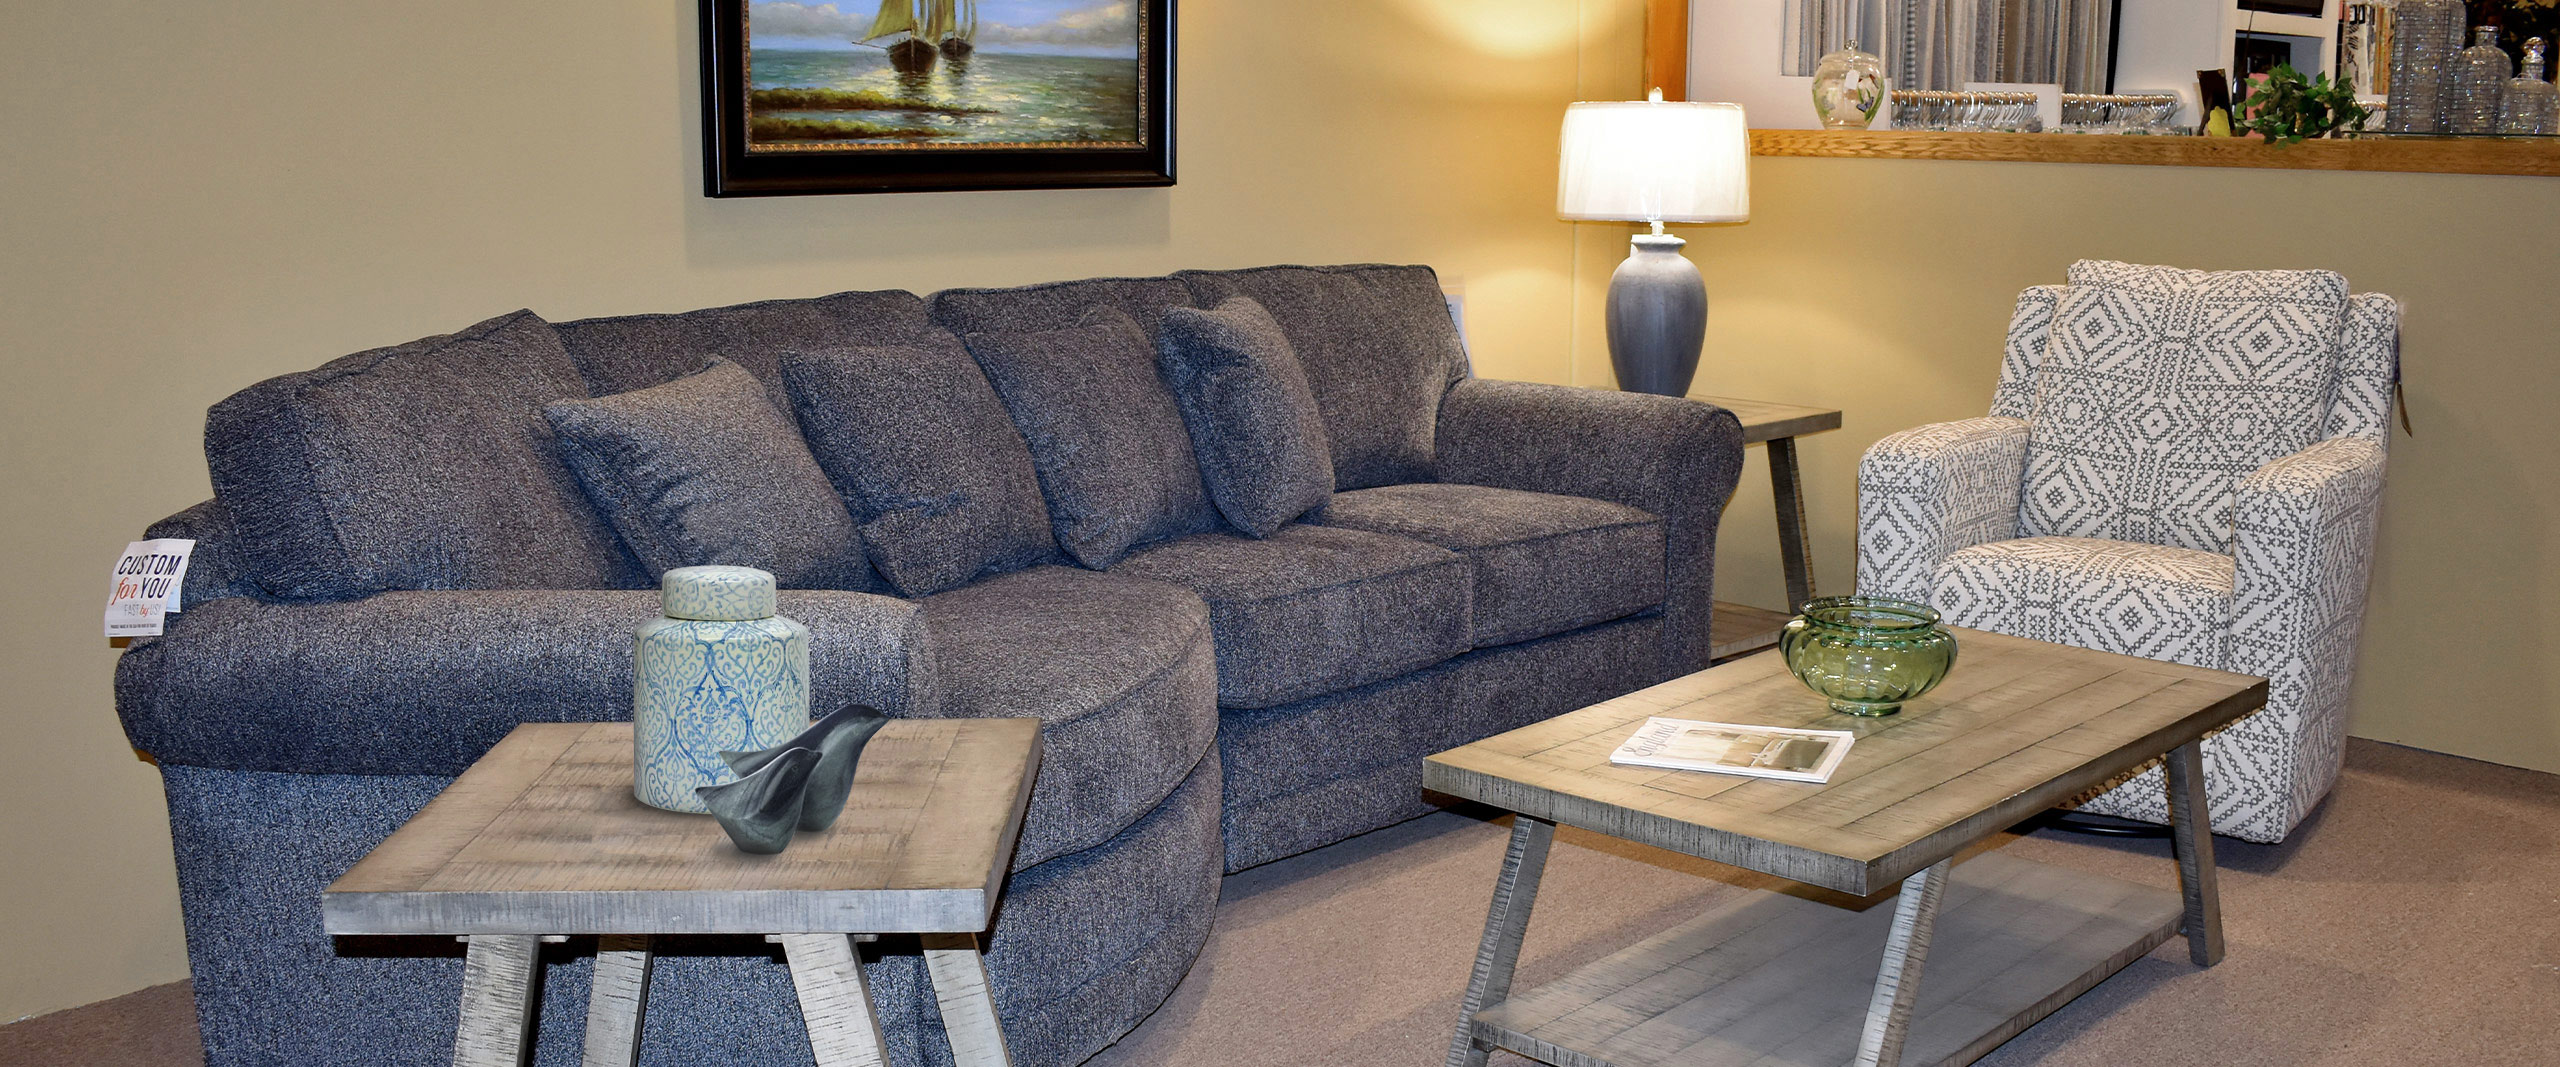 Home Accessories and Couches